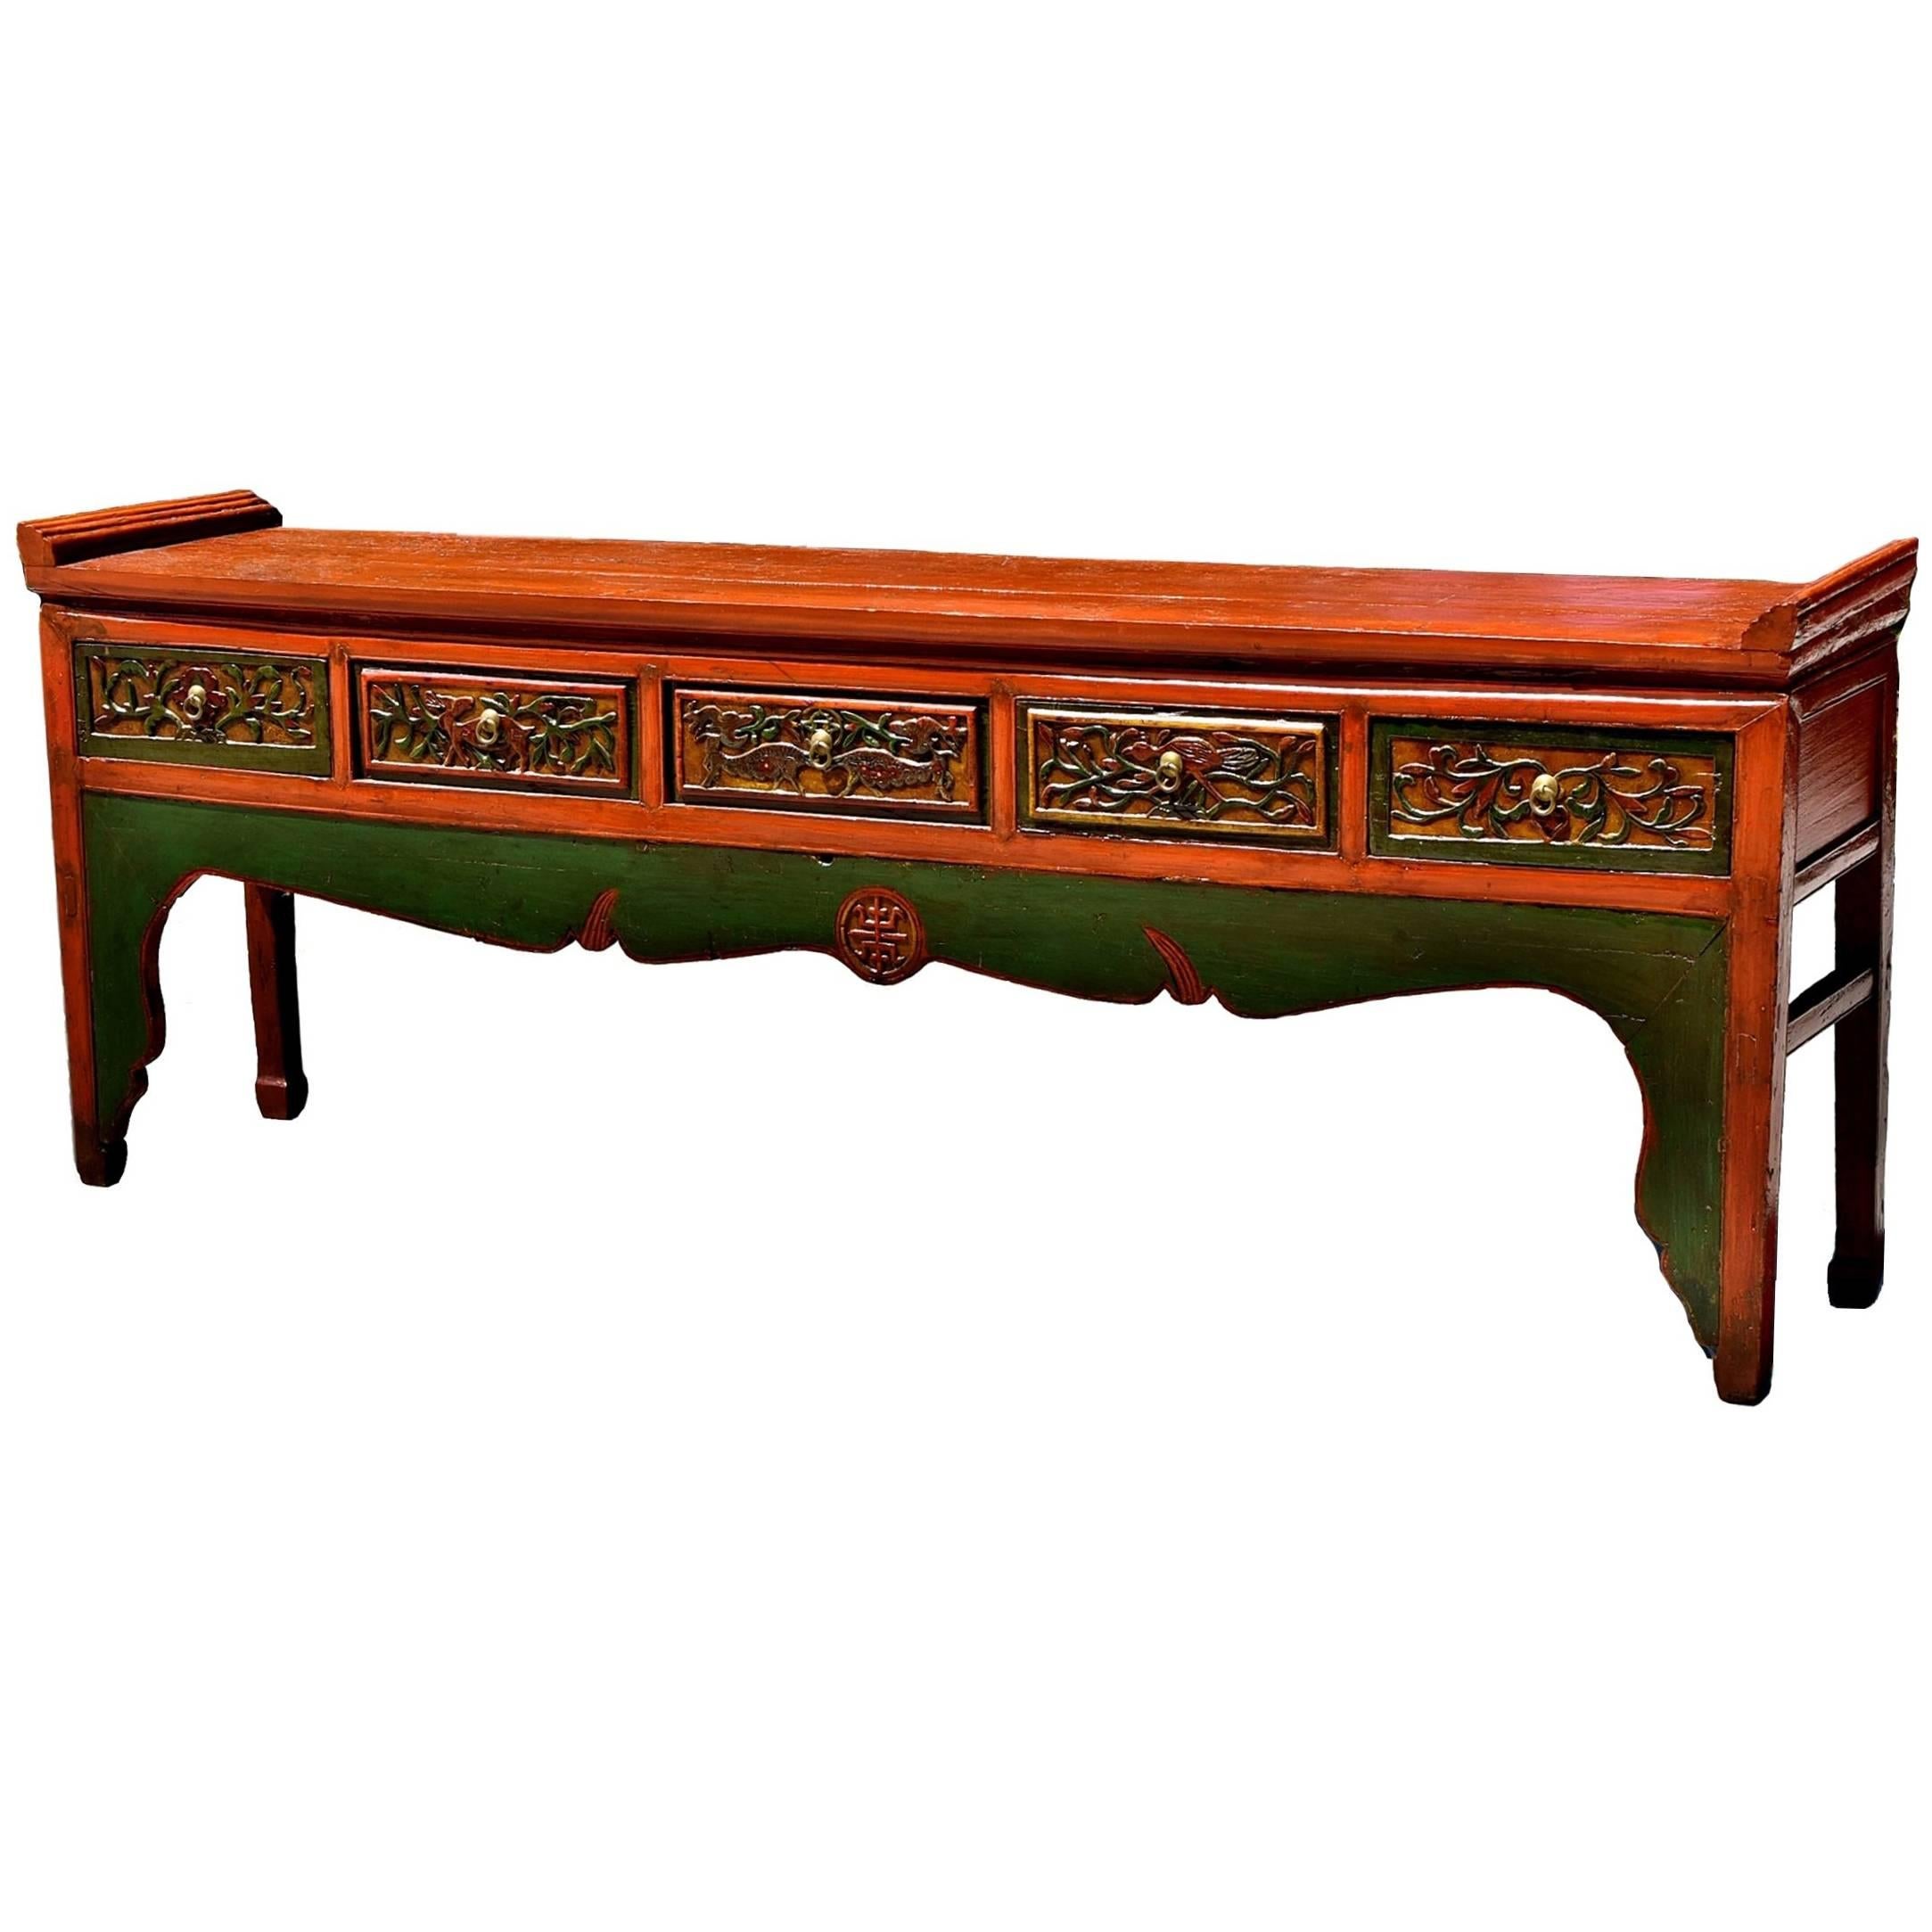 This magnificent table is one of our most treasured pieces from Northern China. At an extraordinary length of 98.5